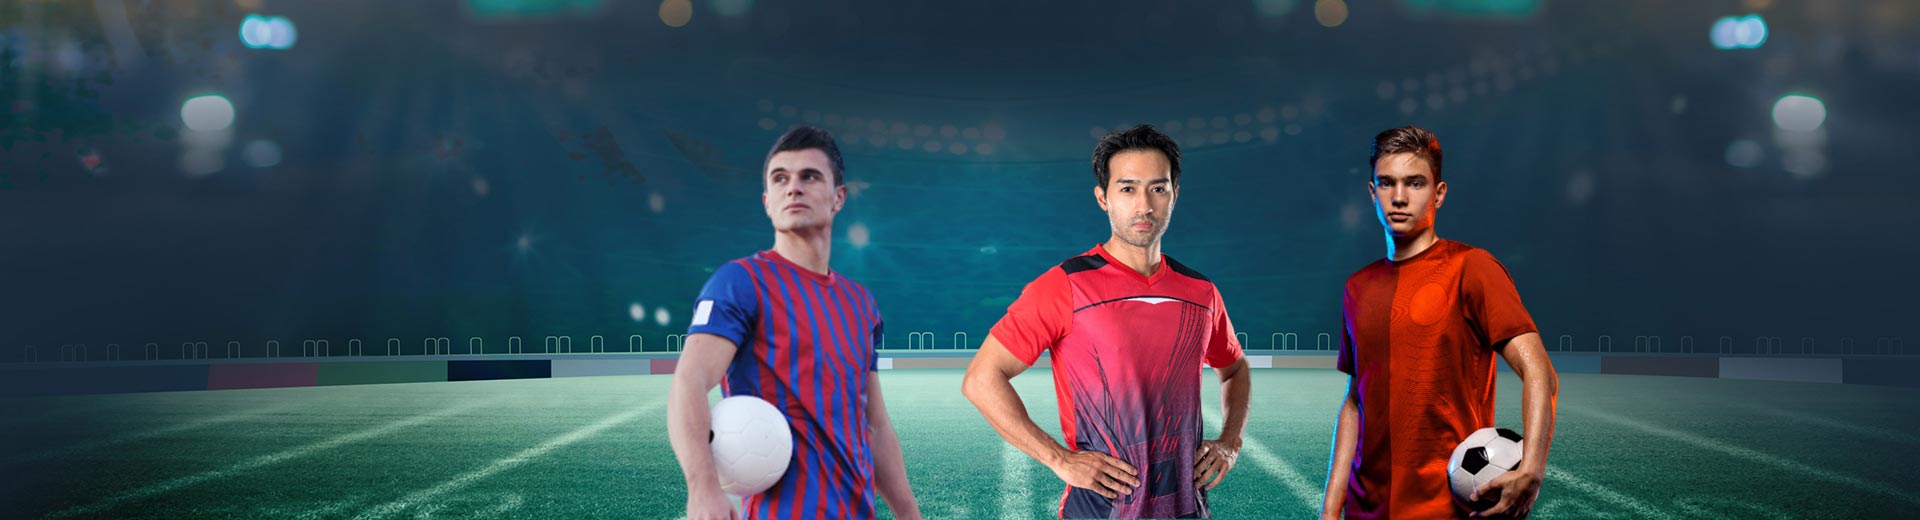 Sublimation Soccer Jersey Manufacturers in Tula